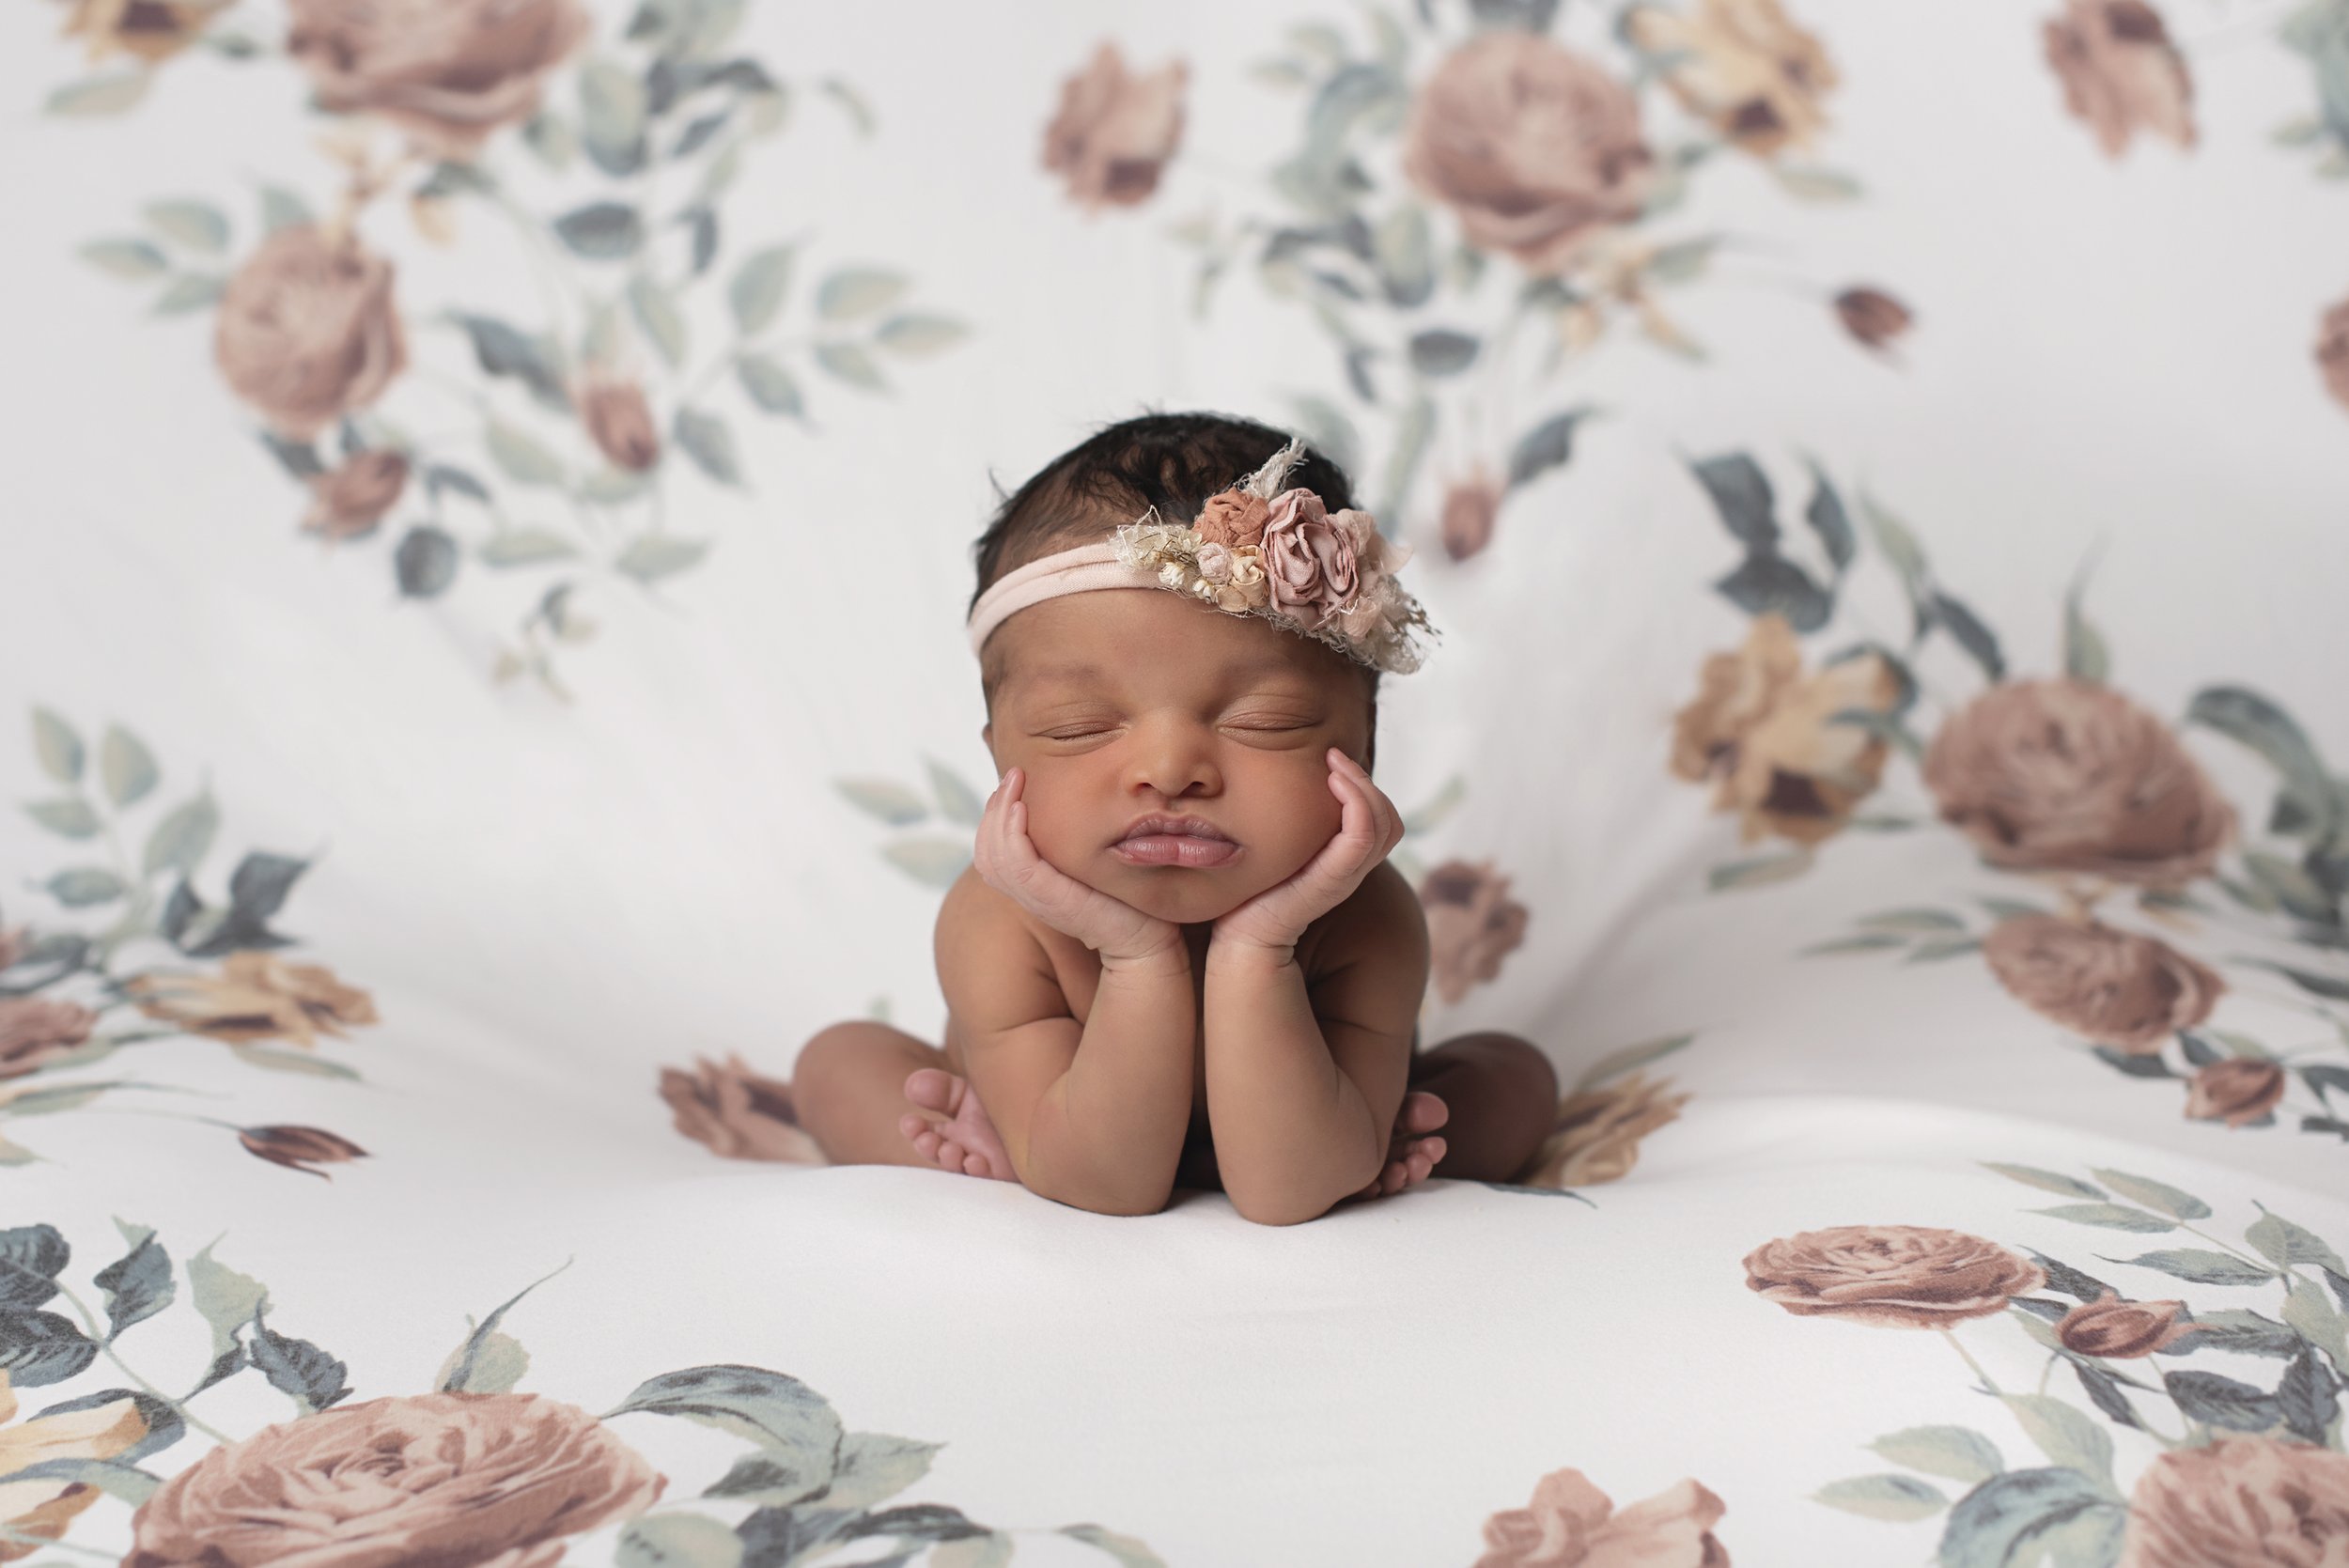 floral background froggy pose newborn